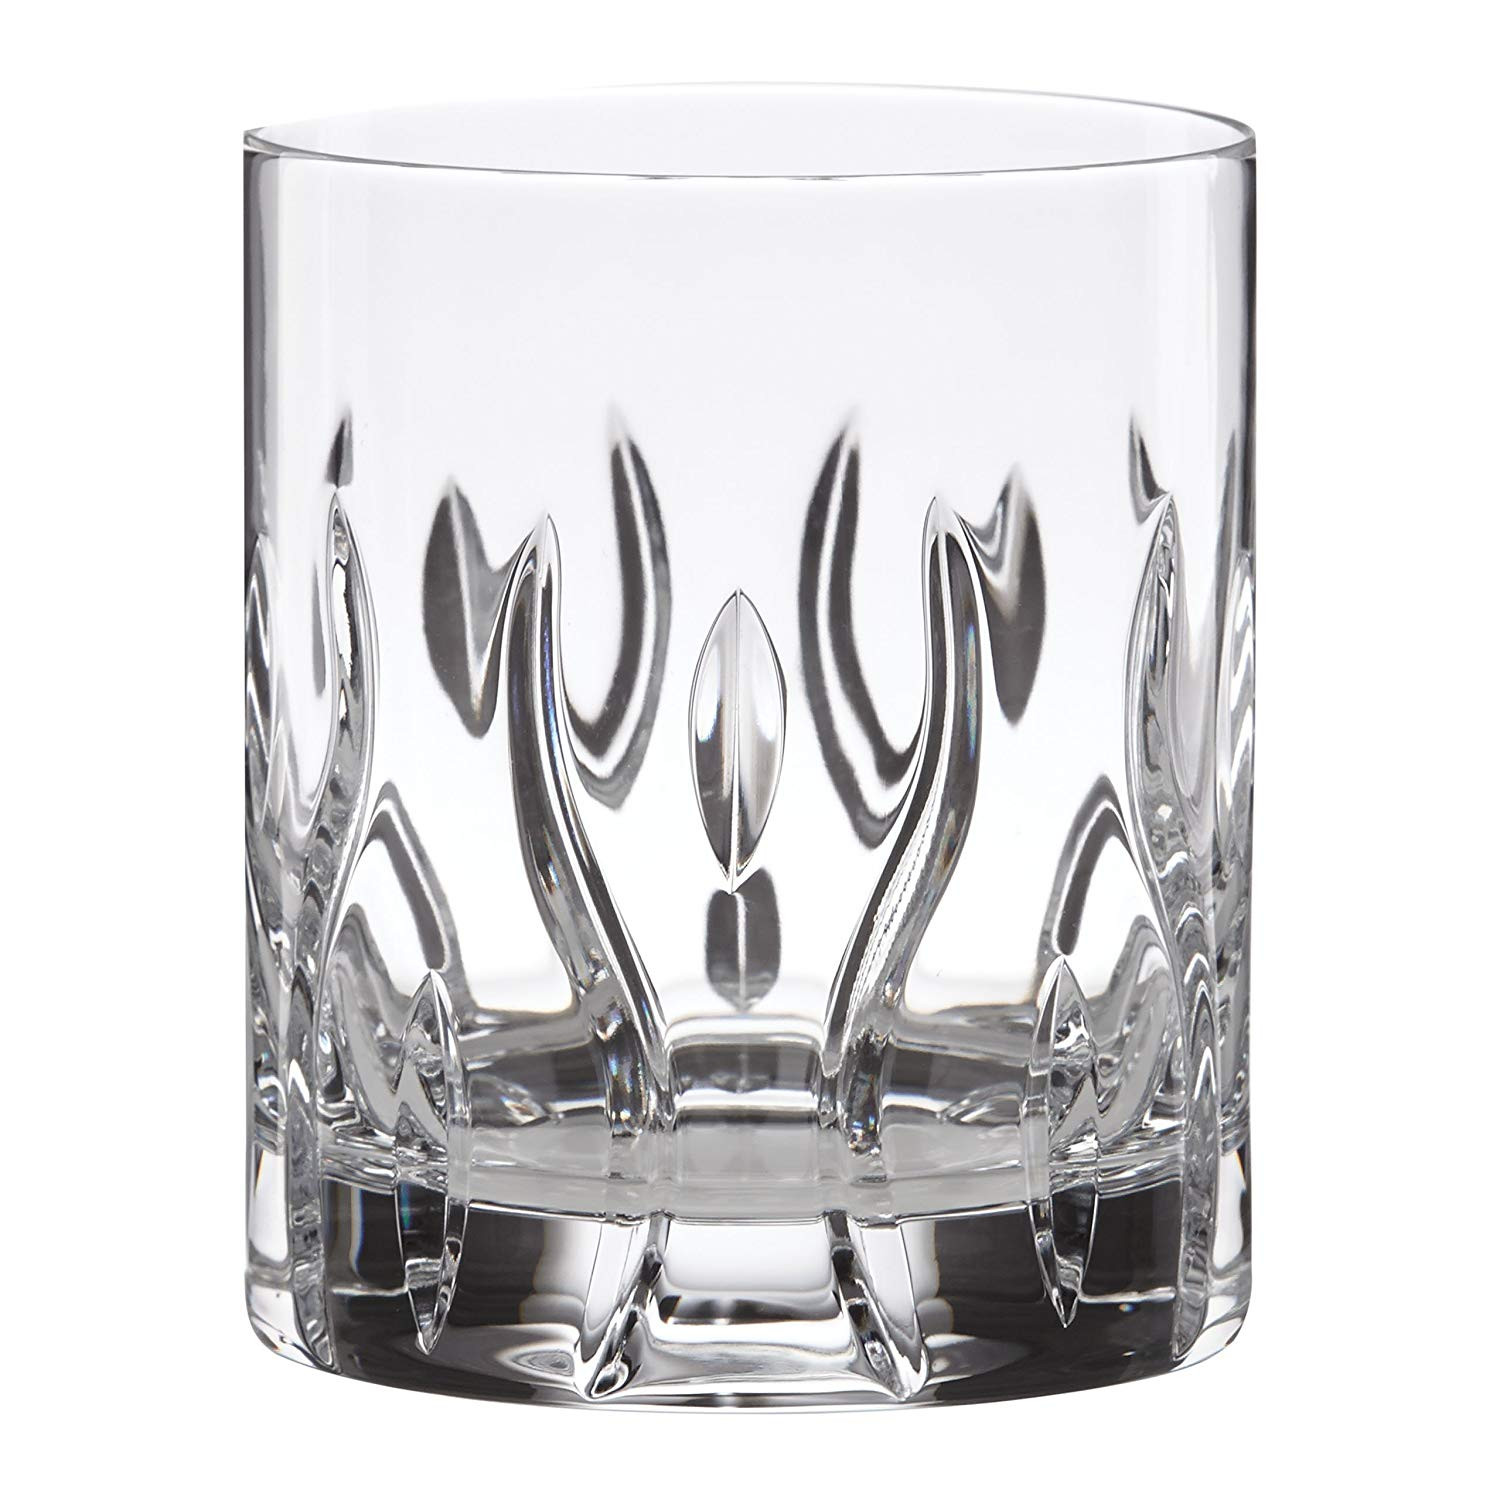 12 attractive Old Waterford Crystal Vase 2024 free download old waterford crystal vase of amazon com lenox 857141 irish spring darcy double old fashioned with regard to amazon com lenox 857141 irish spring darcy double old fashioned glasses set of 2 